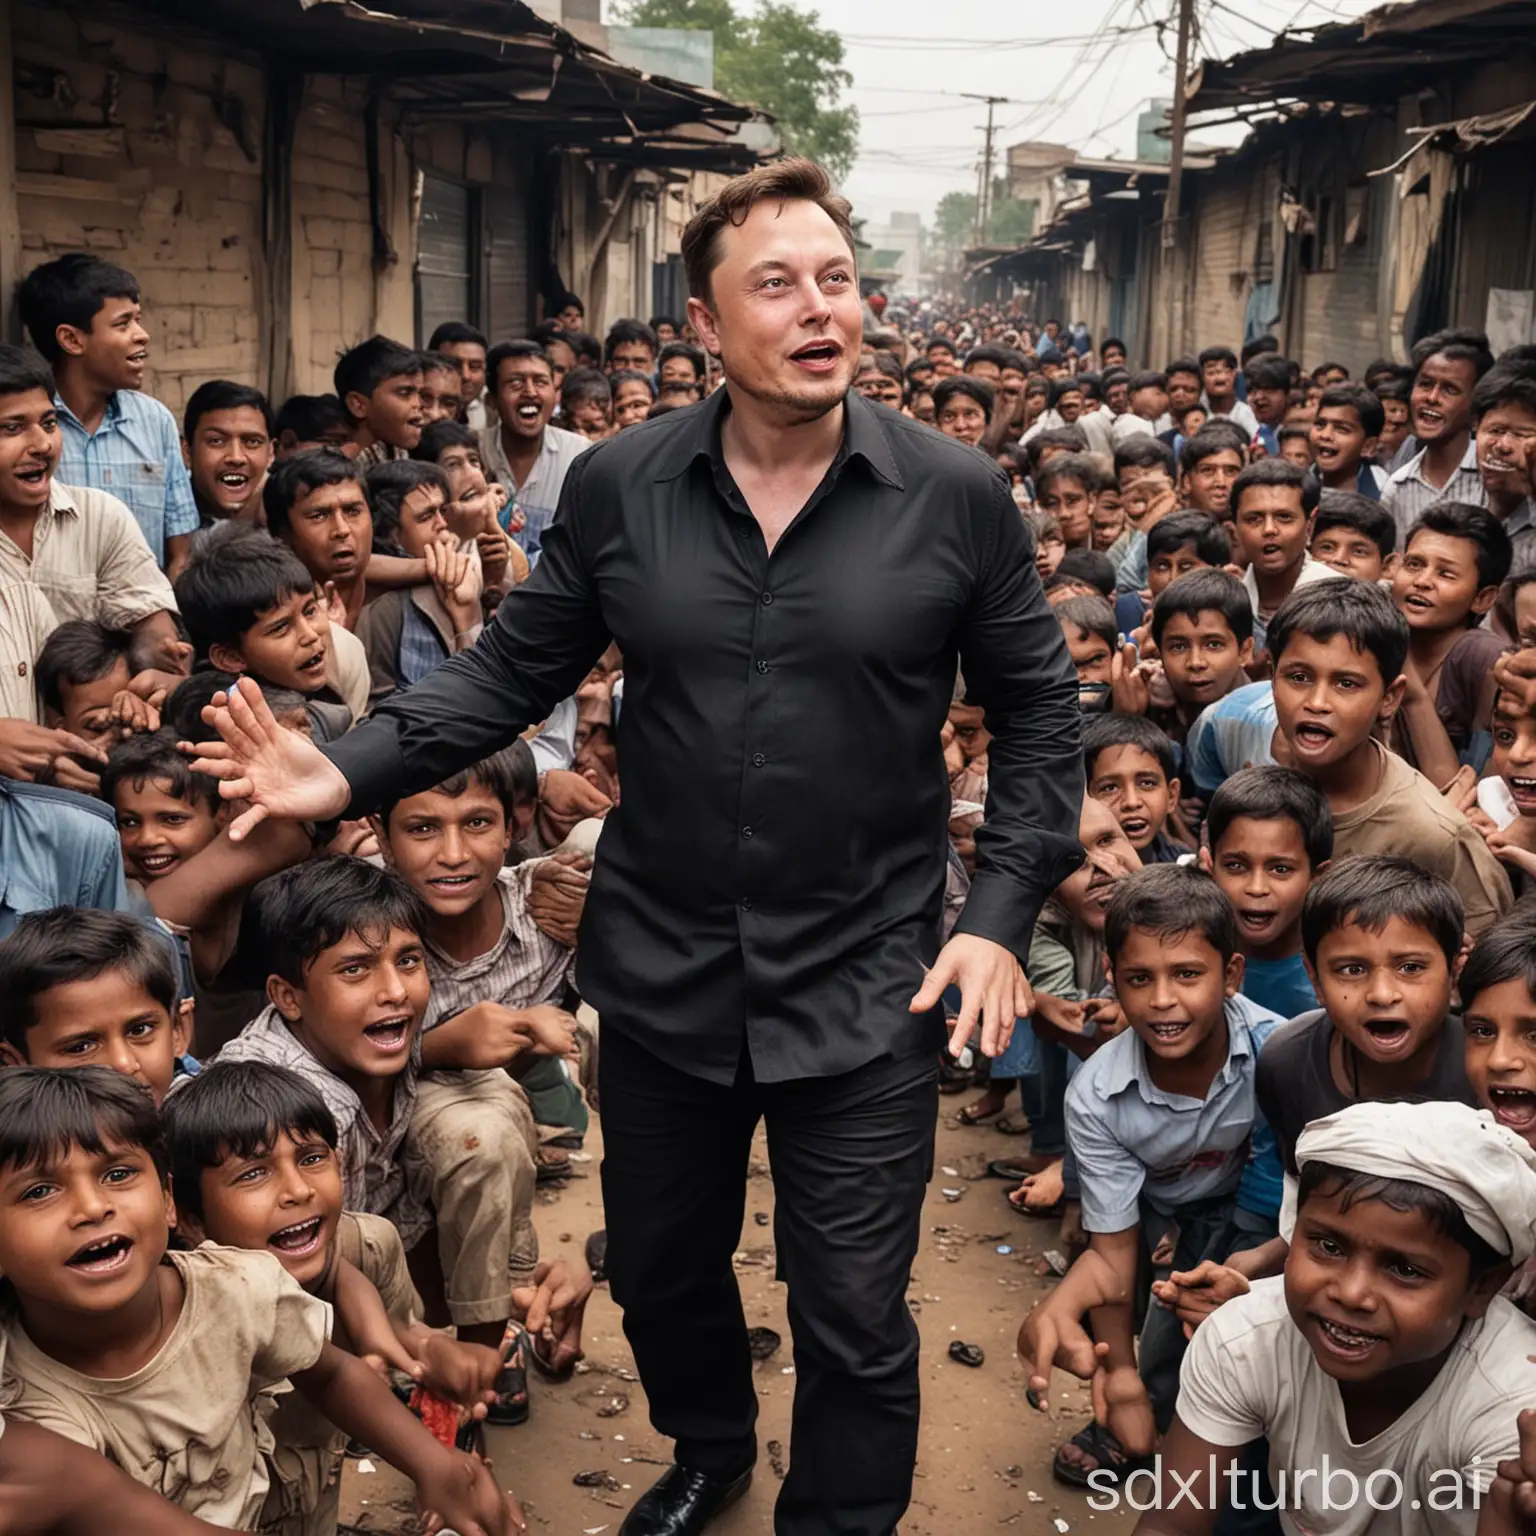 elon musk coming from the slums of mumbai in his and all the kids and people are crying because he stole all there money